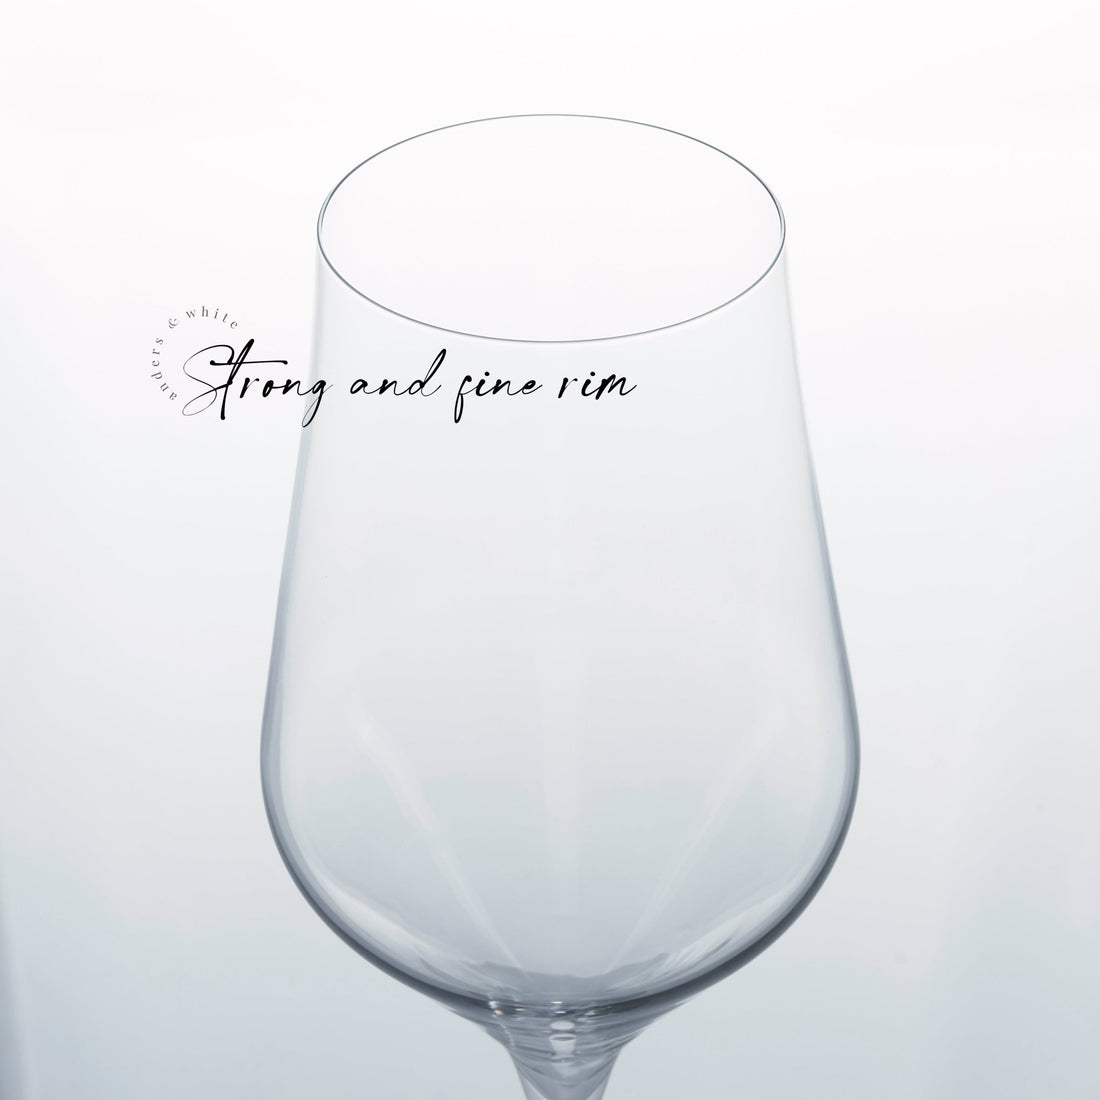 Why Use Crystal Wine Glasses Instead of Regular Glass? - Anders & White